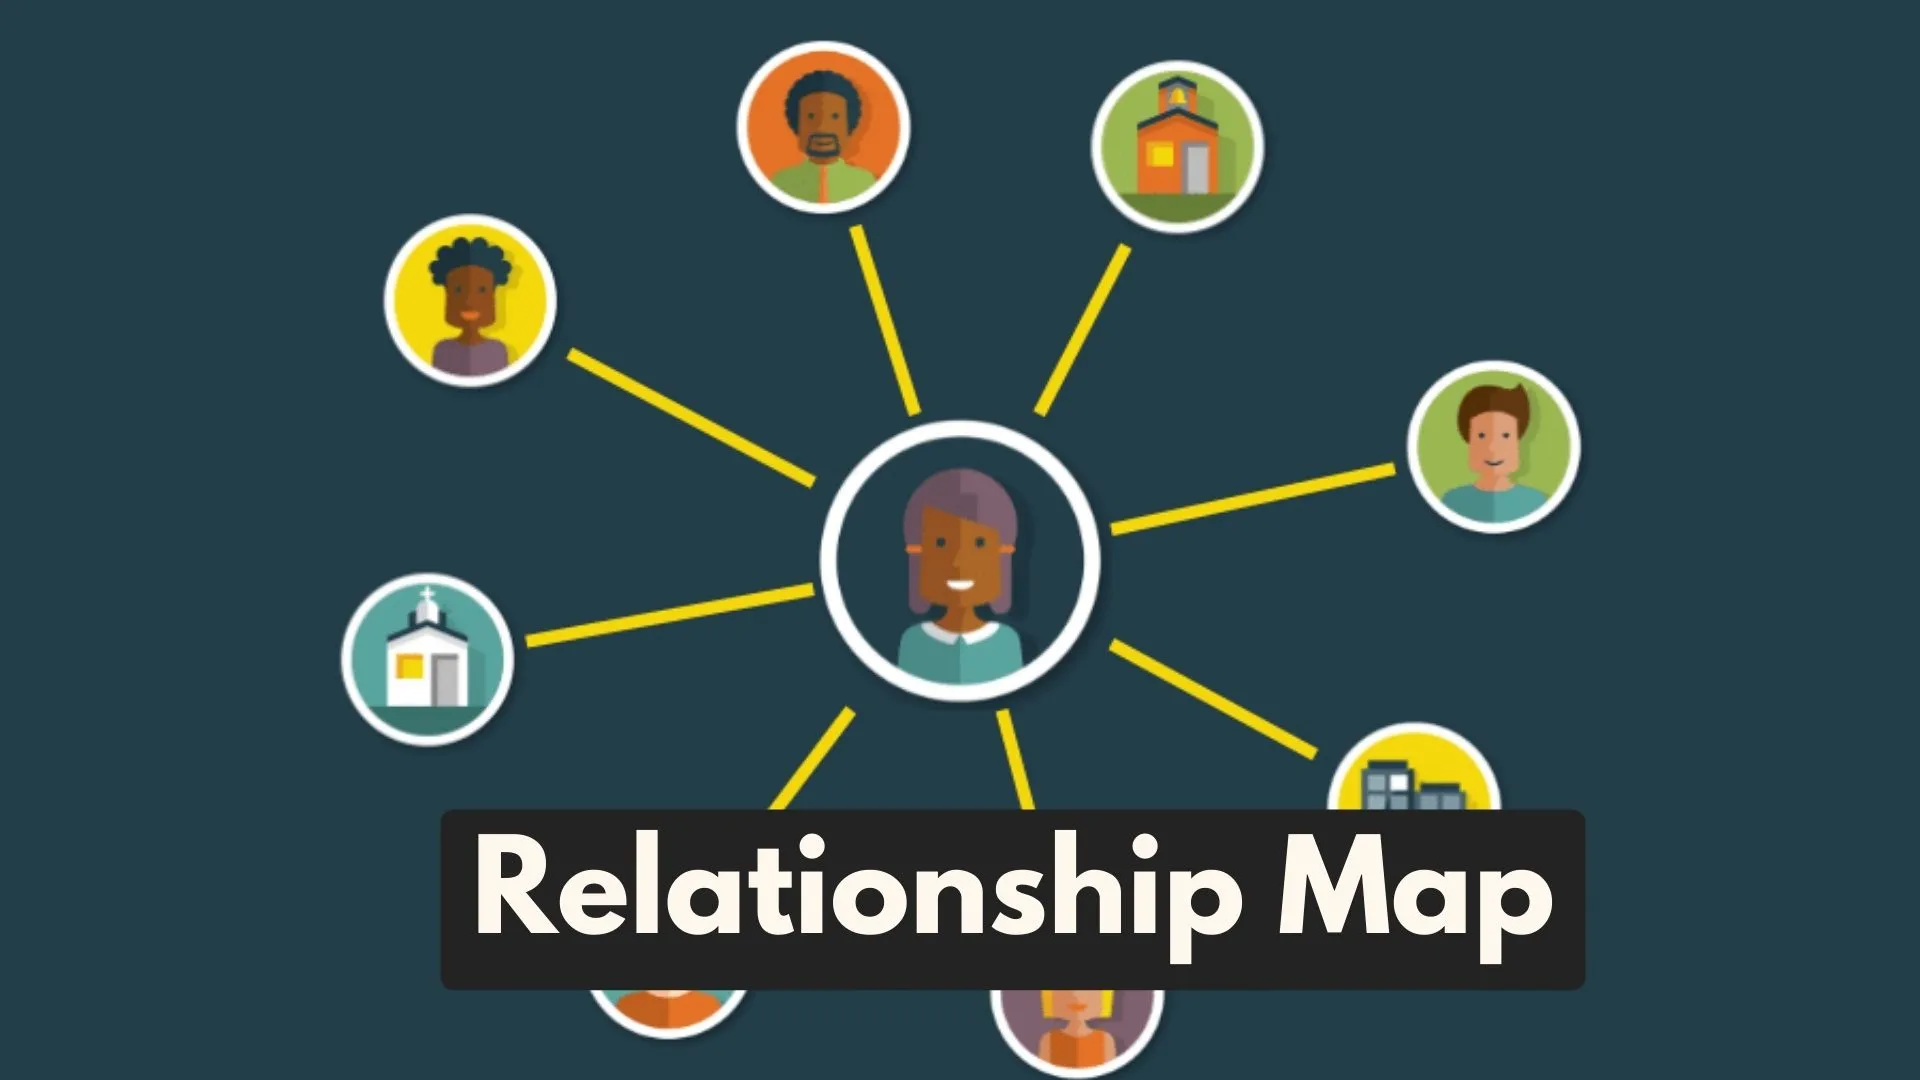 What Is a Relationship Map and How Can It Help Your Business? simplifiedblogs.com